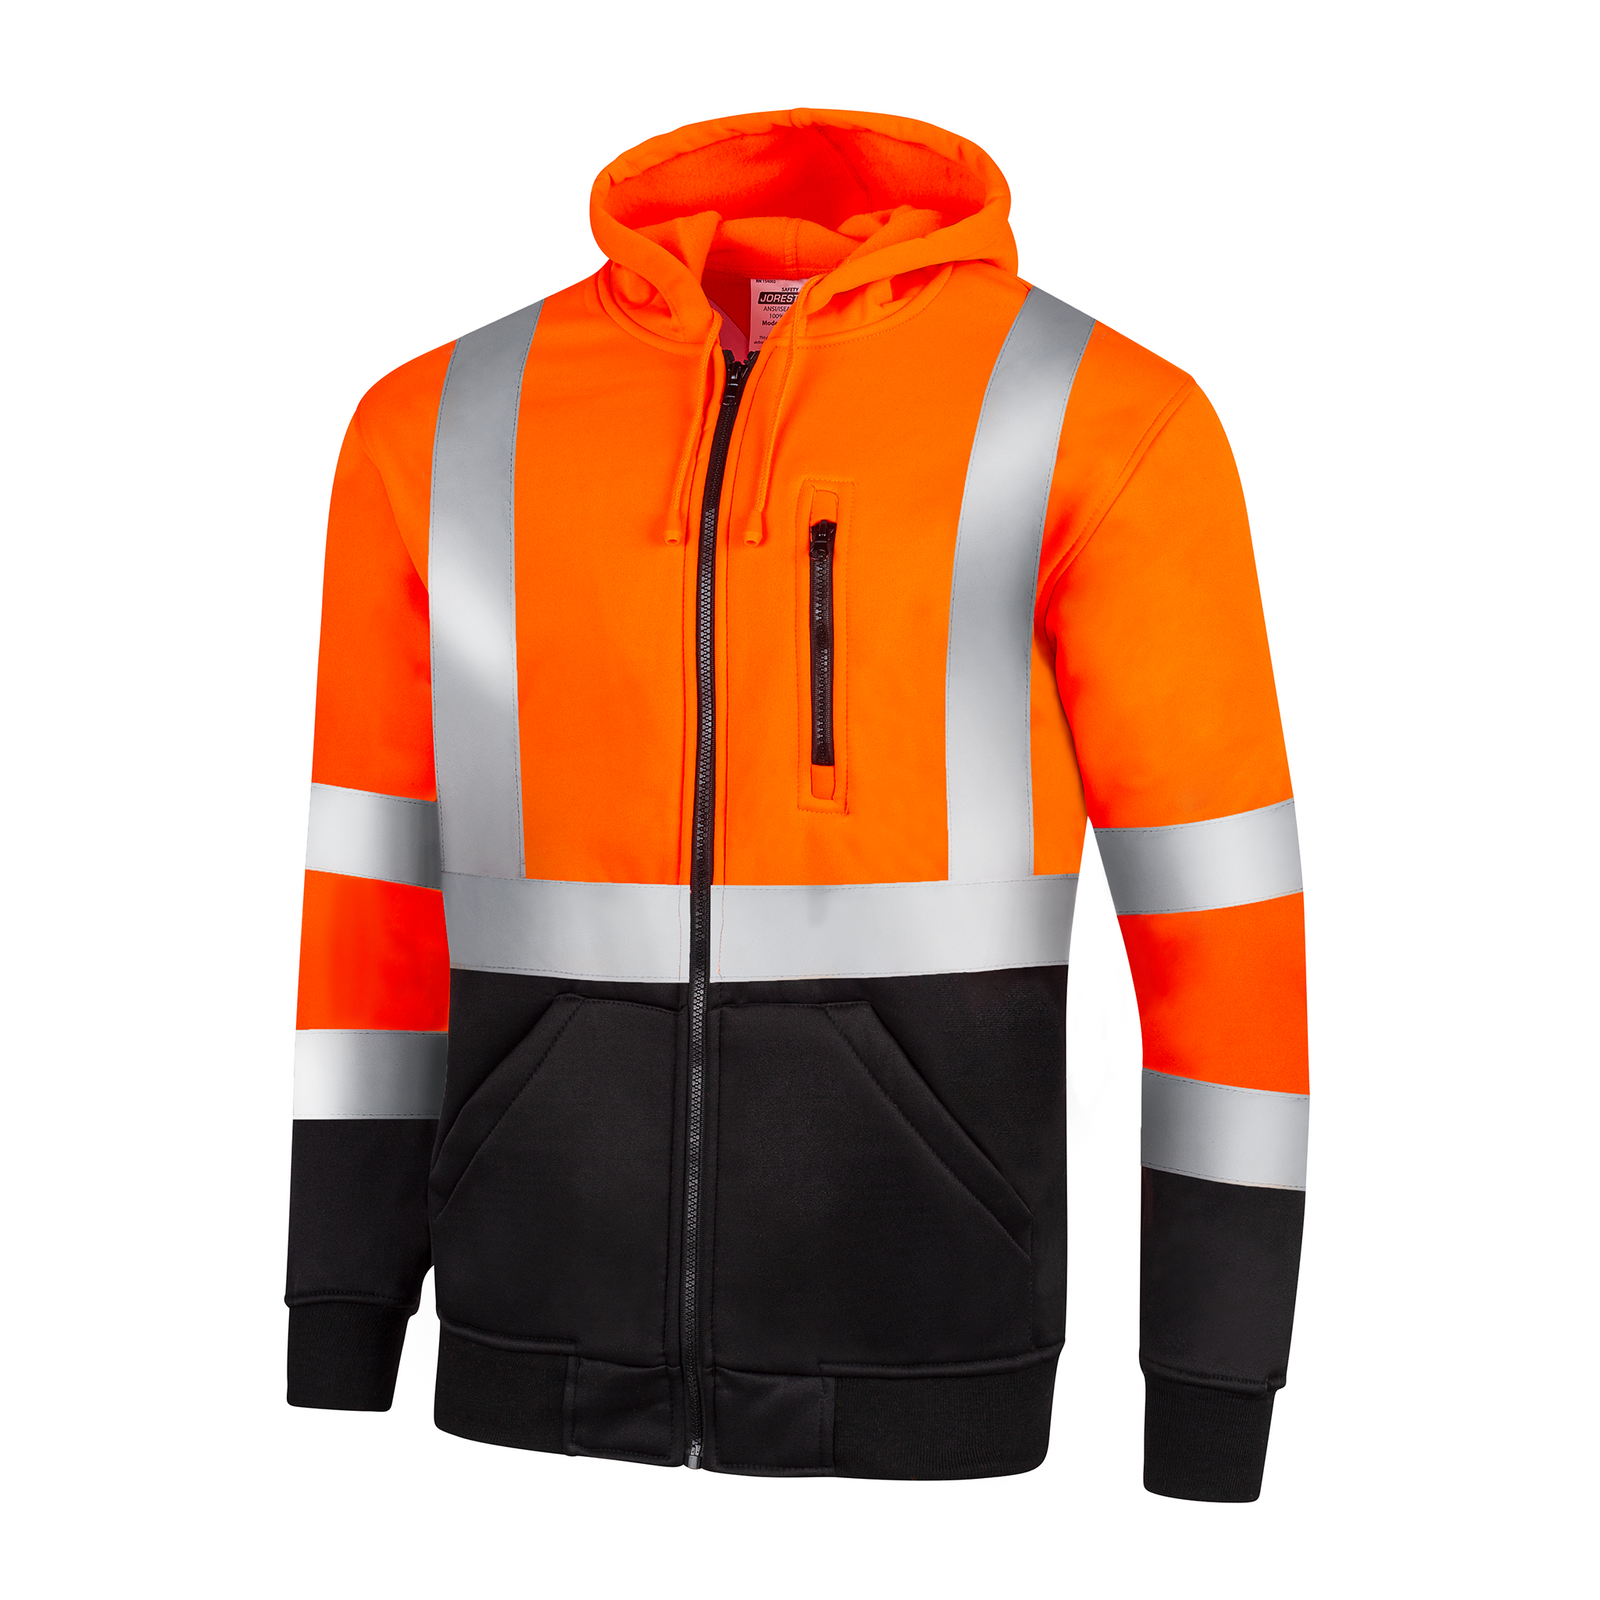 JORESTECH hi-vis ANSI compliant class 3 type R safety hooded orange and black sweatshirt with reflective stripe